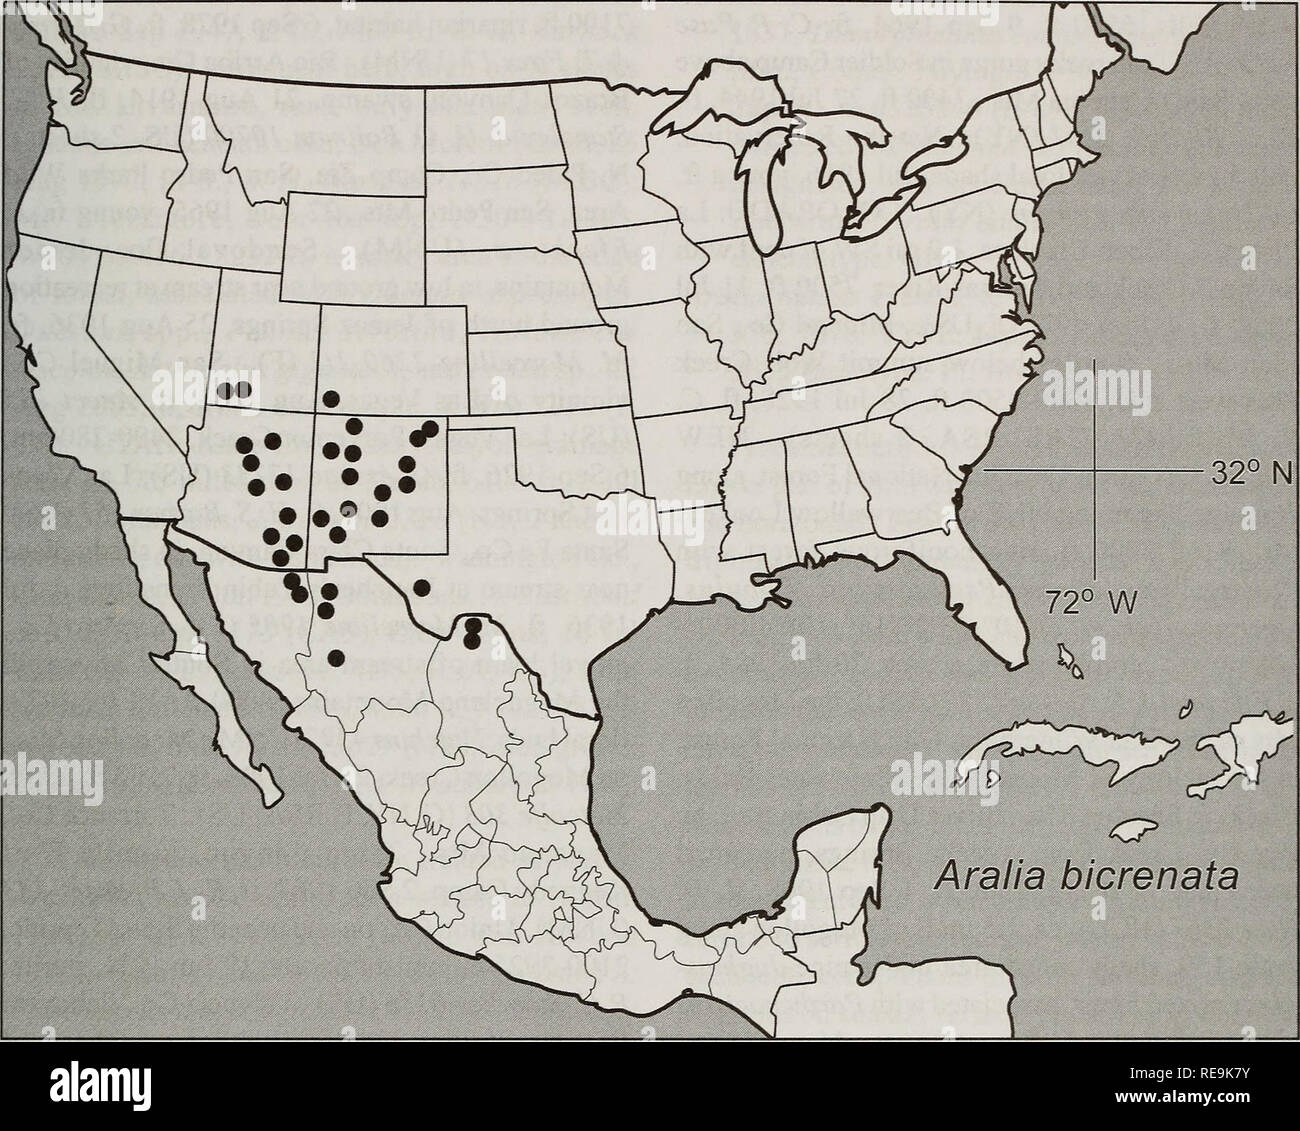 . Contributions from the United States National Herbarium. Botany. Systematics of Aralia 71. Fig. 21. Map of U.S.A. and Mexico showing the distribution of Aralia bicrenata Wooton &amp; Standi. very scarce with Abies, Acer, Cornus, Cimicifuga, 25 Aug 1976, fl, R. K. Gierisch 3789 (ASU, UNM, 2 sheets); Workman Creek area near falls, Sierra Anchas Mountains, mixed conifer-oak hillside near swiftly flowing stream, 7000 ft, 29 Jul 1968, fl, C. Pase &amp; D. Keil 3461 (RSA); near waterfalls of Workman Canyon, rich moist area beside the Workman Creek, in mixed Douglas fir, Acer, and Alnus forest, pla Stock Photo